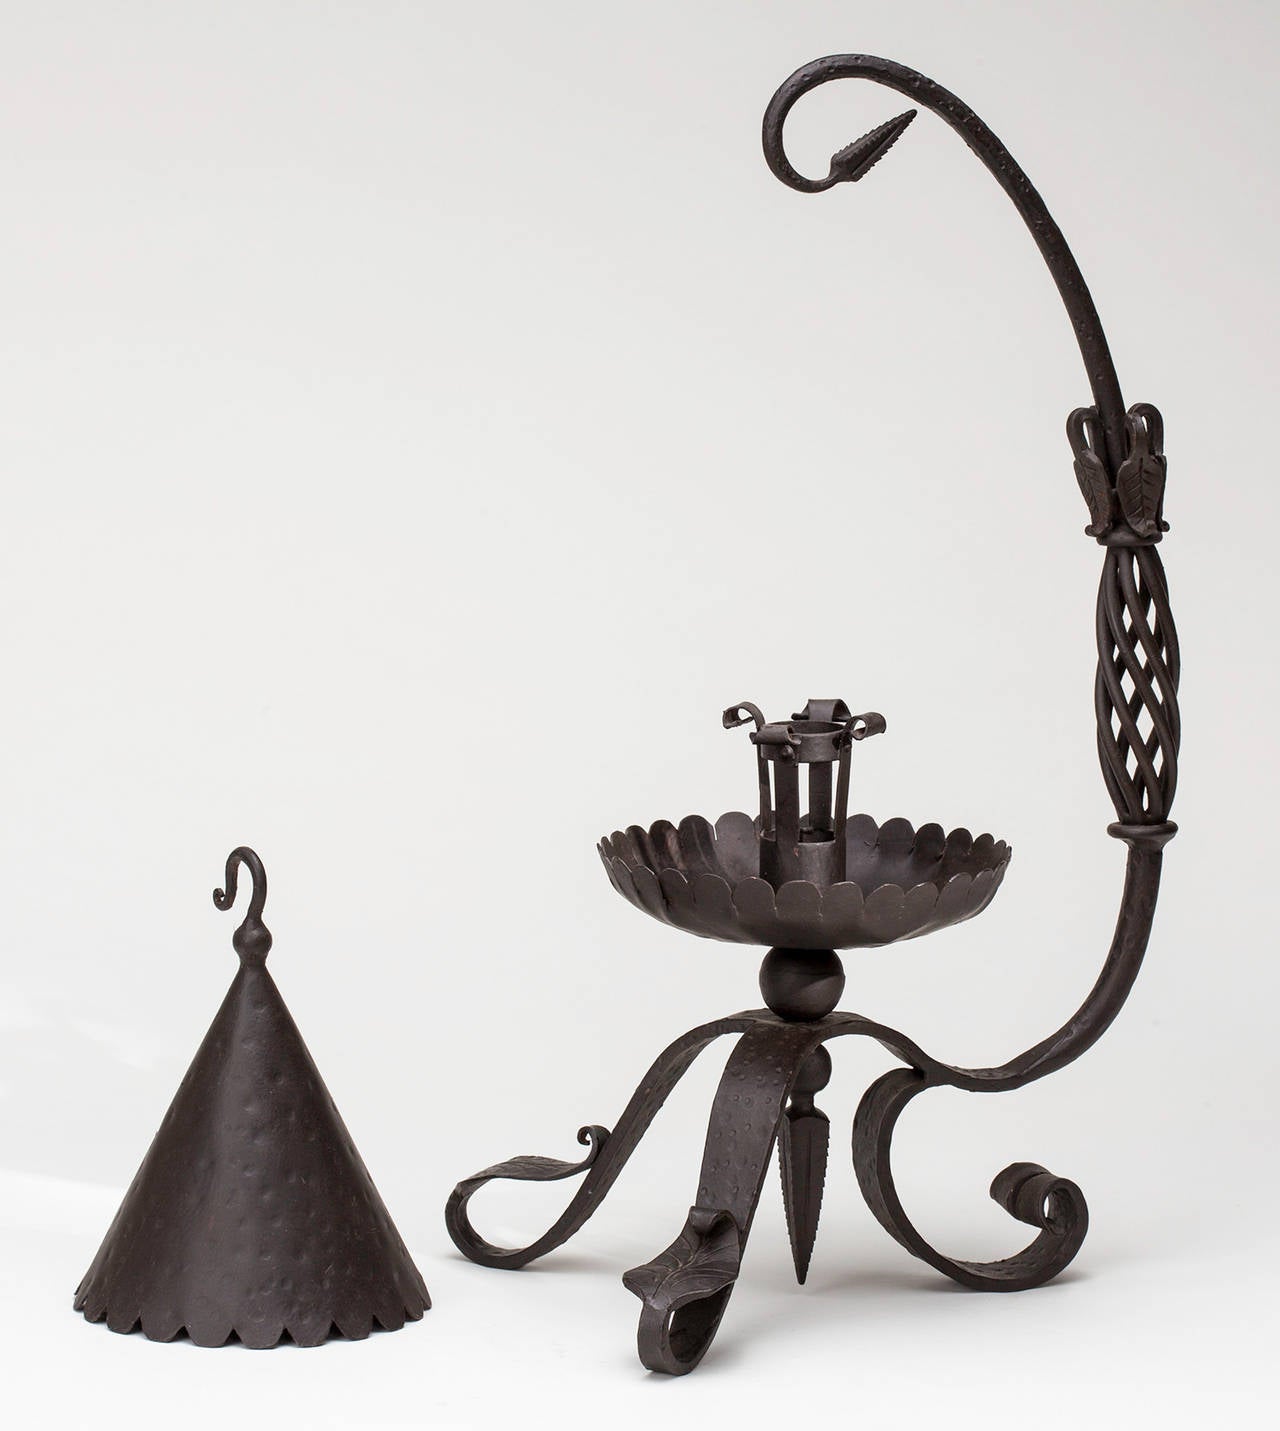 Contemporary Handmade Iron Candle Lantern For Sale